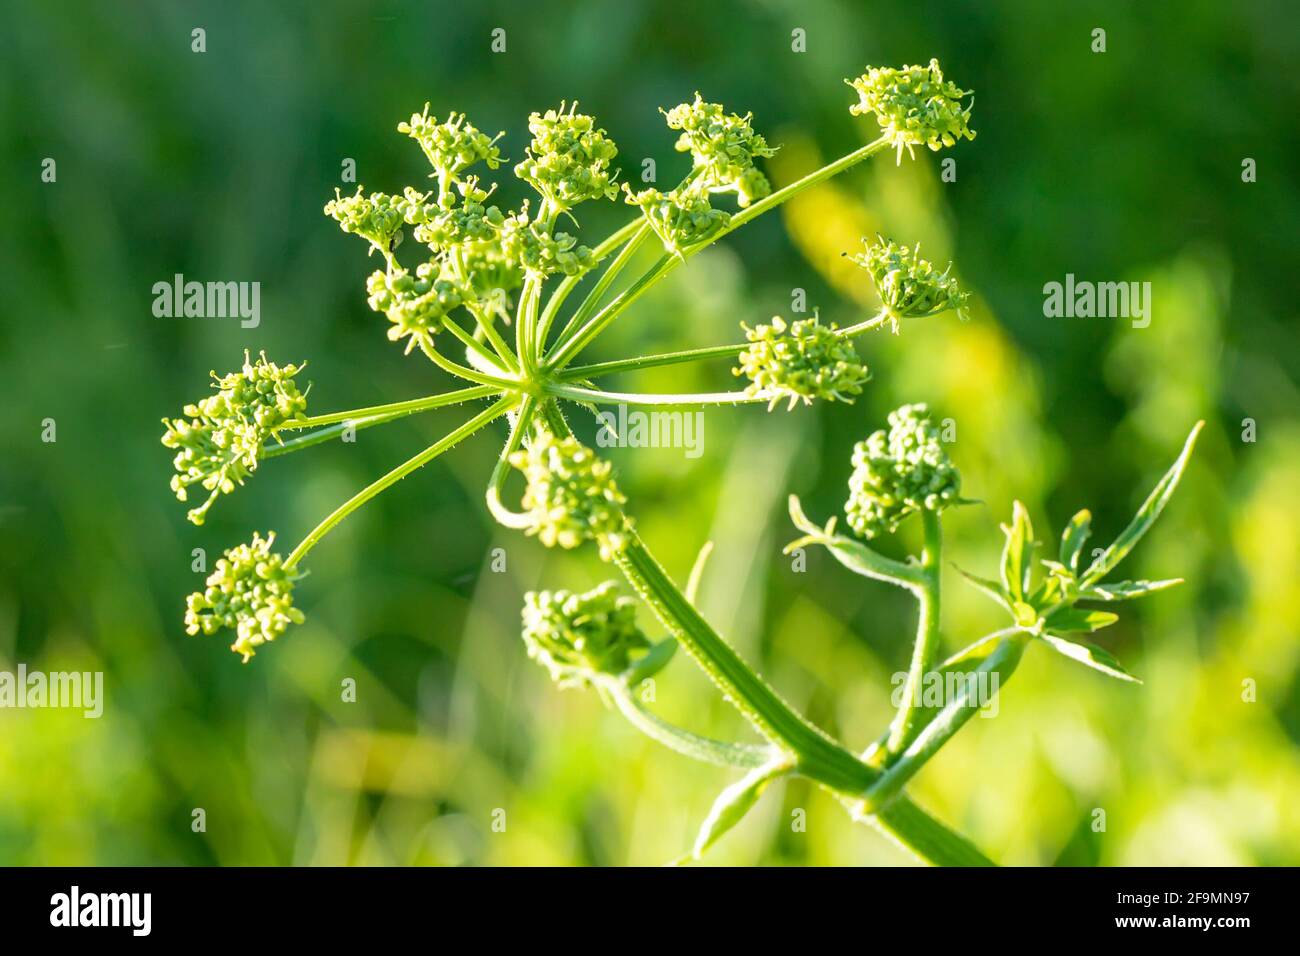 Heracleum sosnowskyi, Sosnowsky's hogweed, giant heads of cow parsnip seeds, a poisonous plant family Apiaceae on a meadow against grass with Graphoso Stock Photo